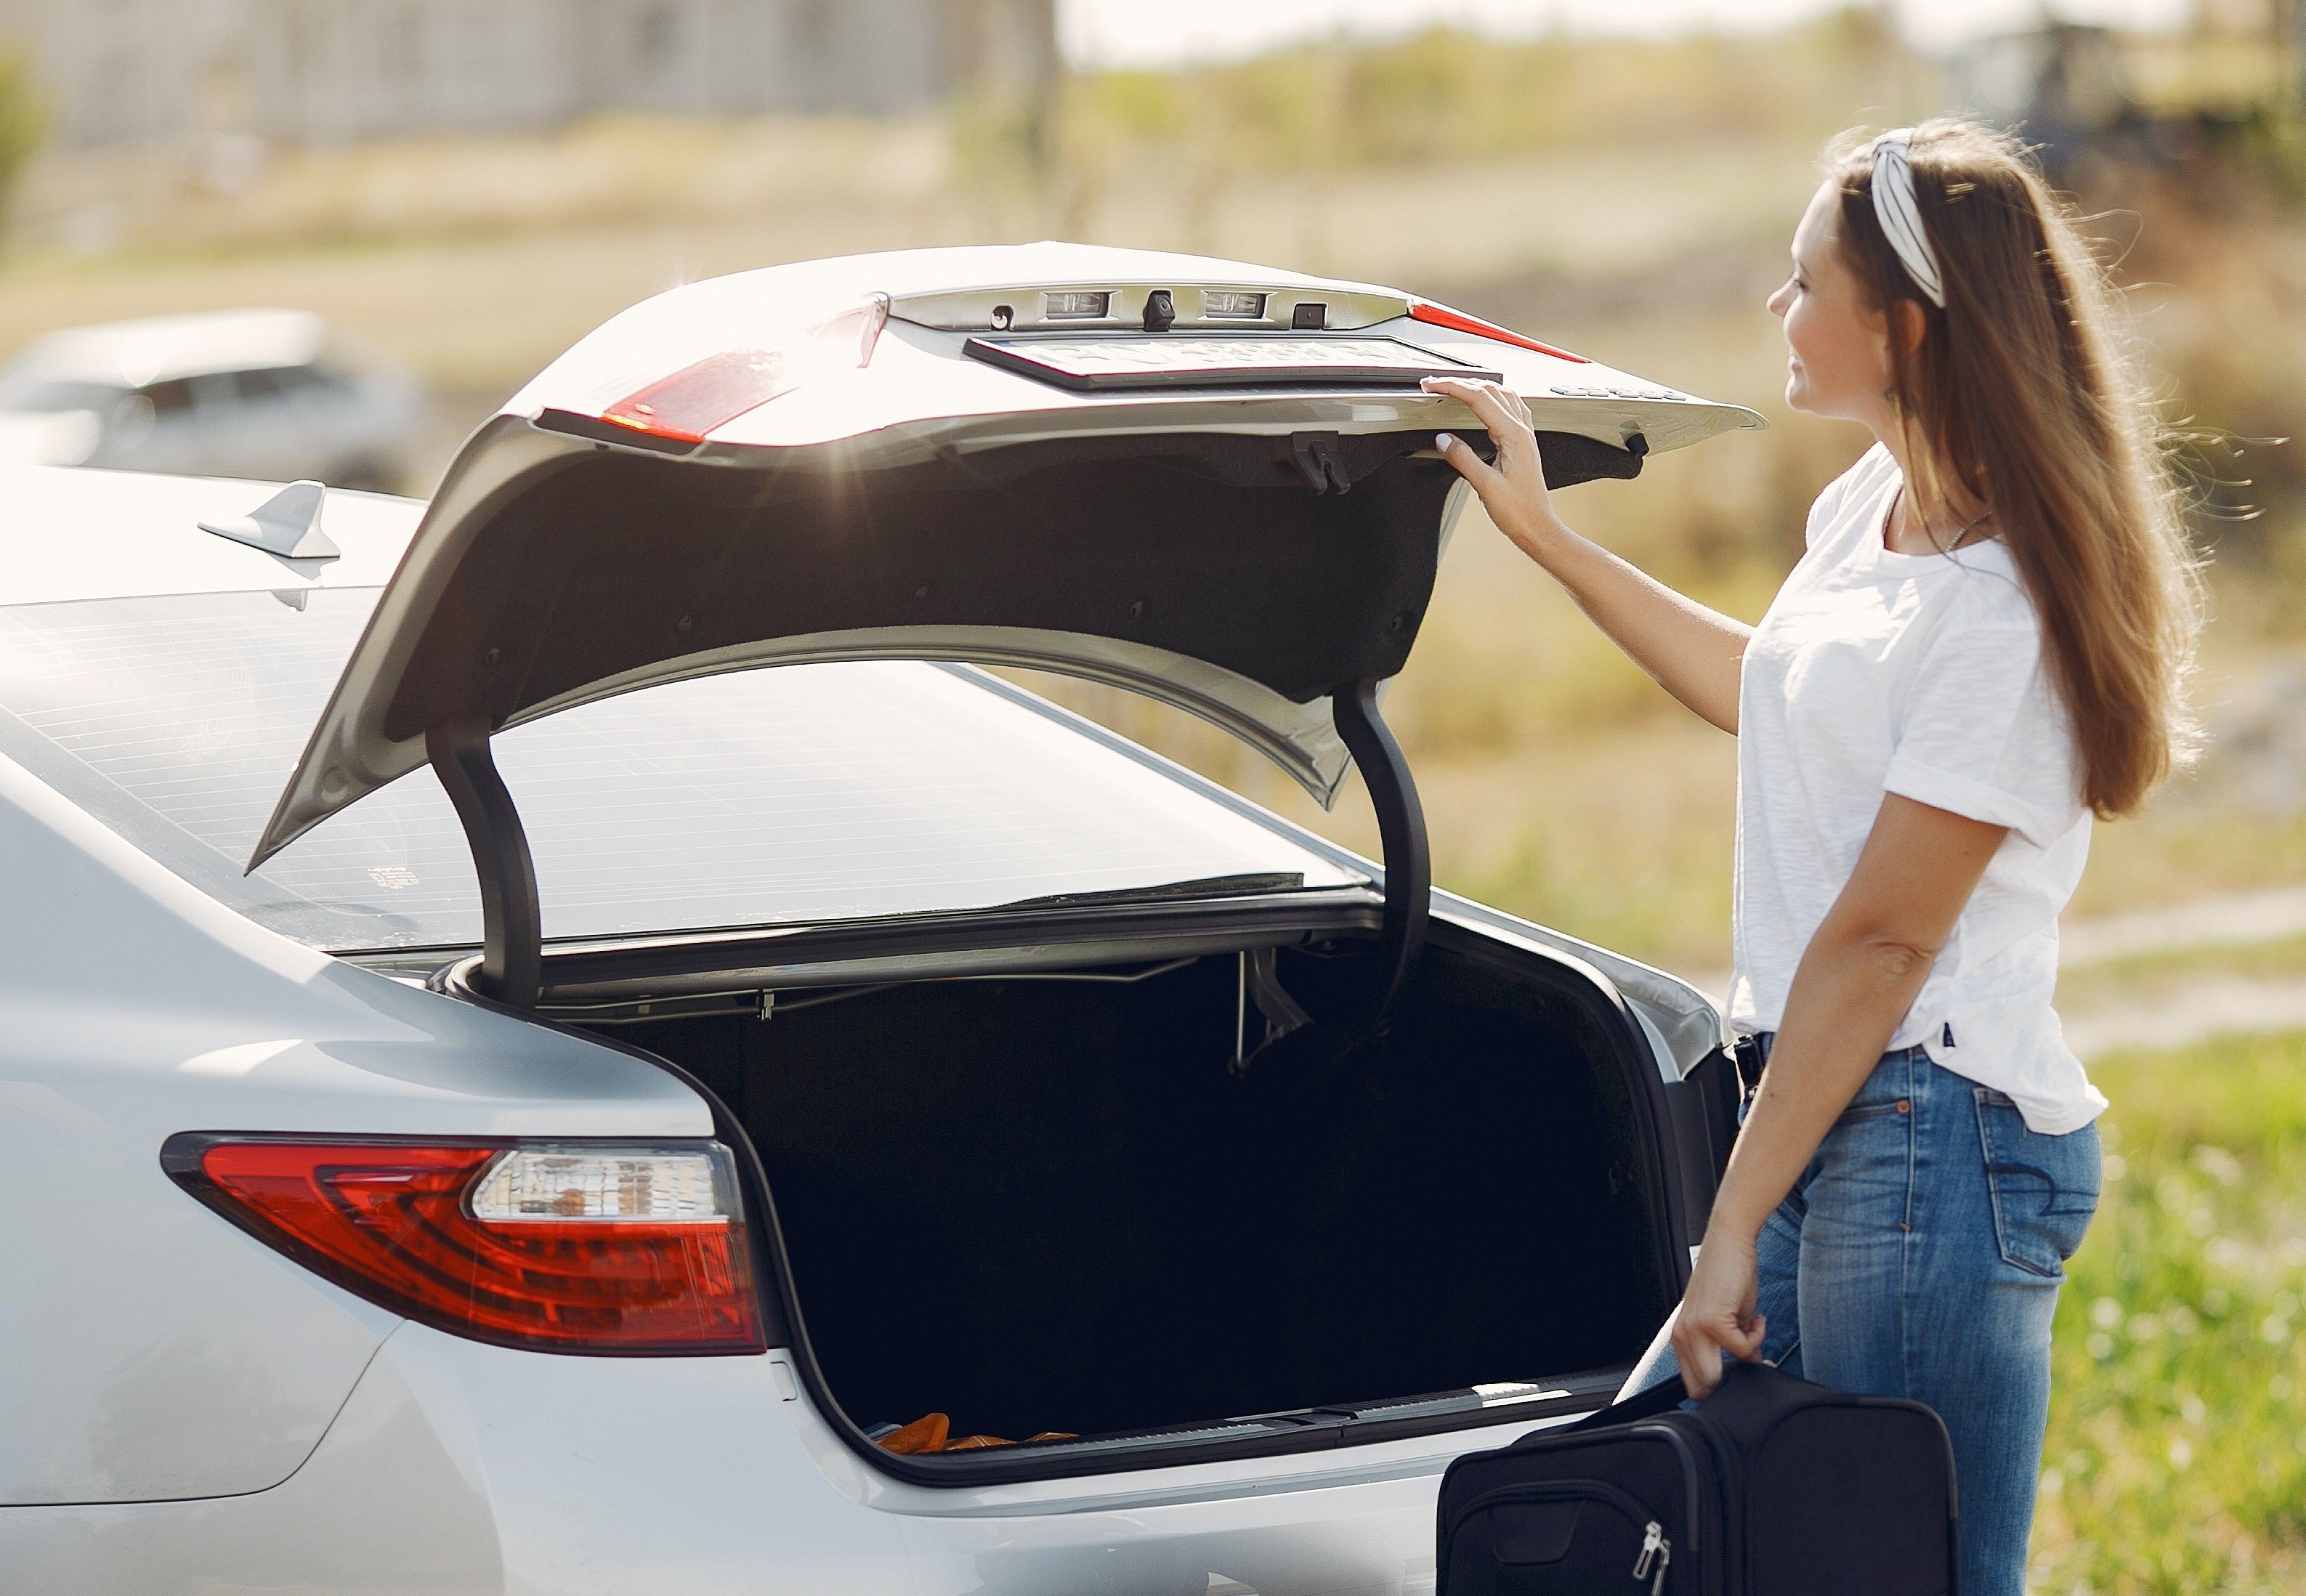 Fran couldn't believe what she found in her trunk. | Source: Pexels